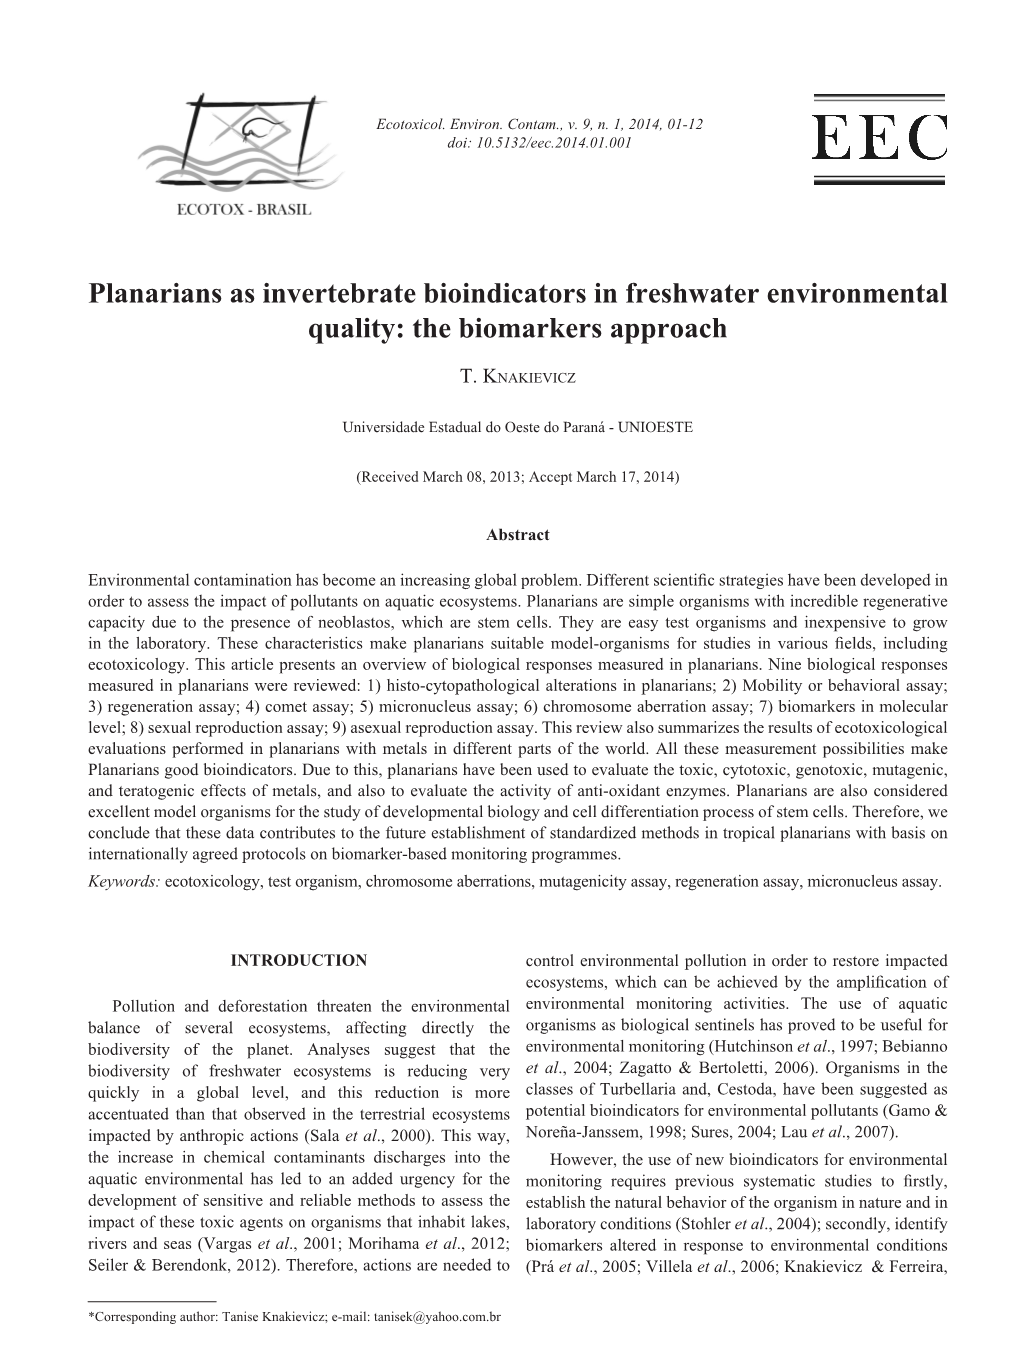 Planarians As Invertebrate Bioindicators in Freshwater Environmental Quality: the Biomarkers Approach